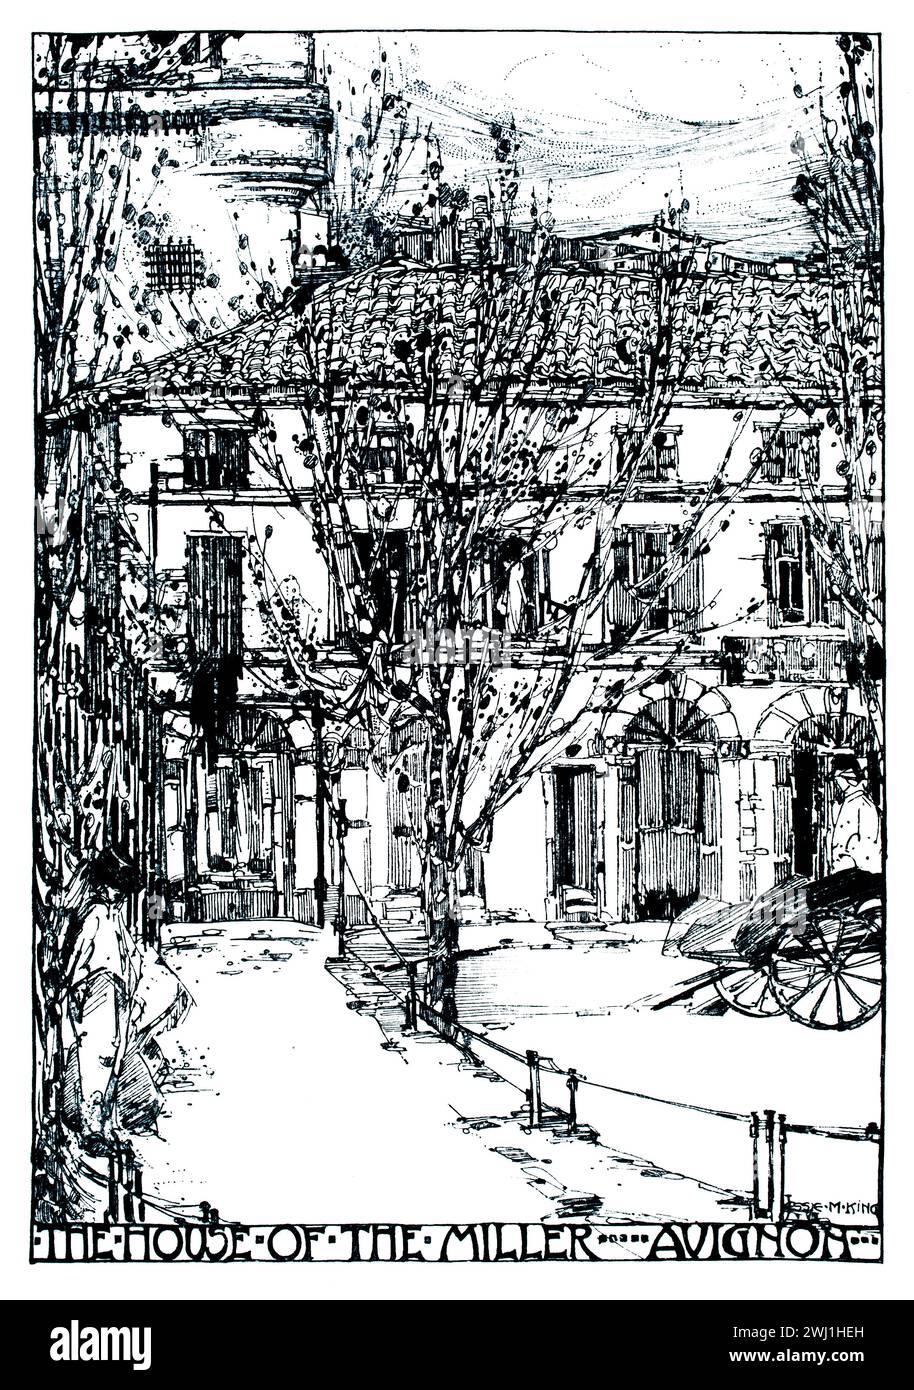 The House of the Miller, Avignon, line illustration by Jessie Marion King Stock Photo